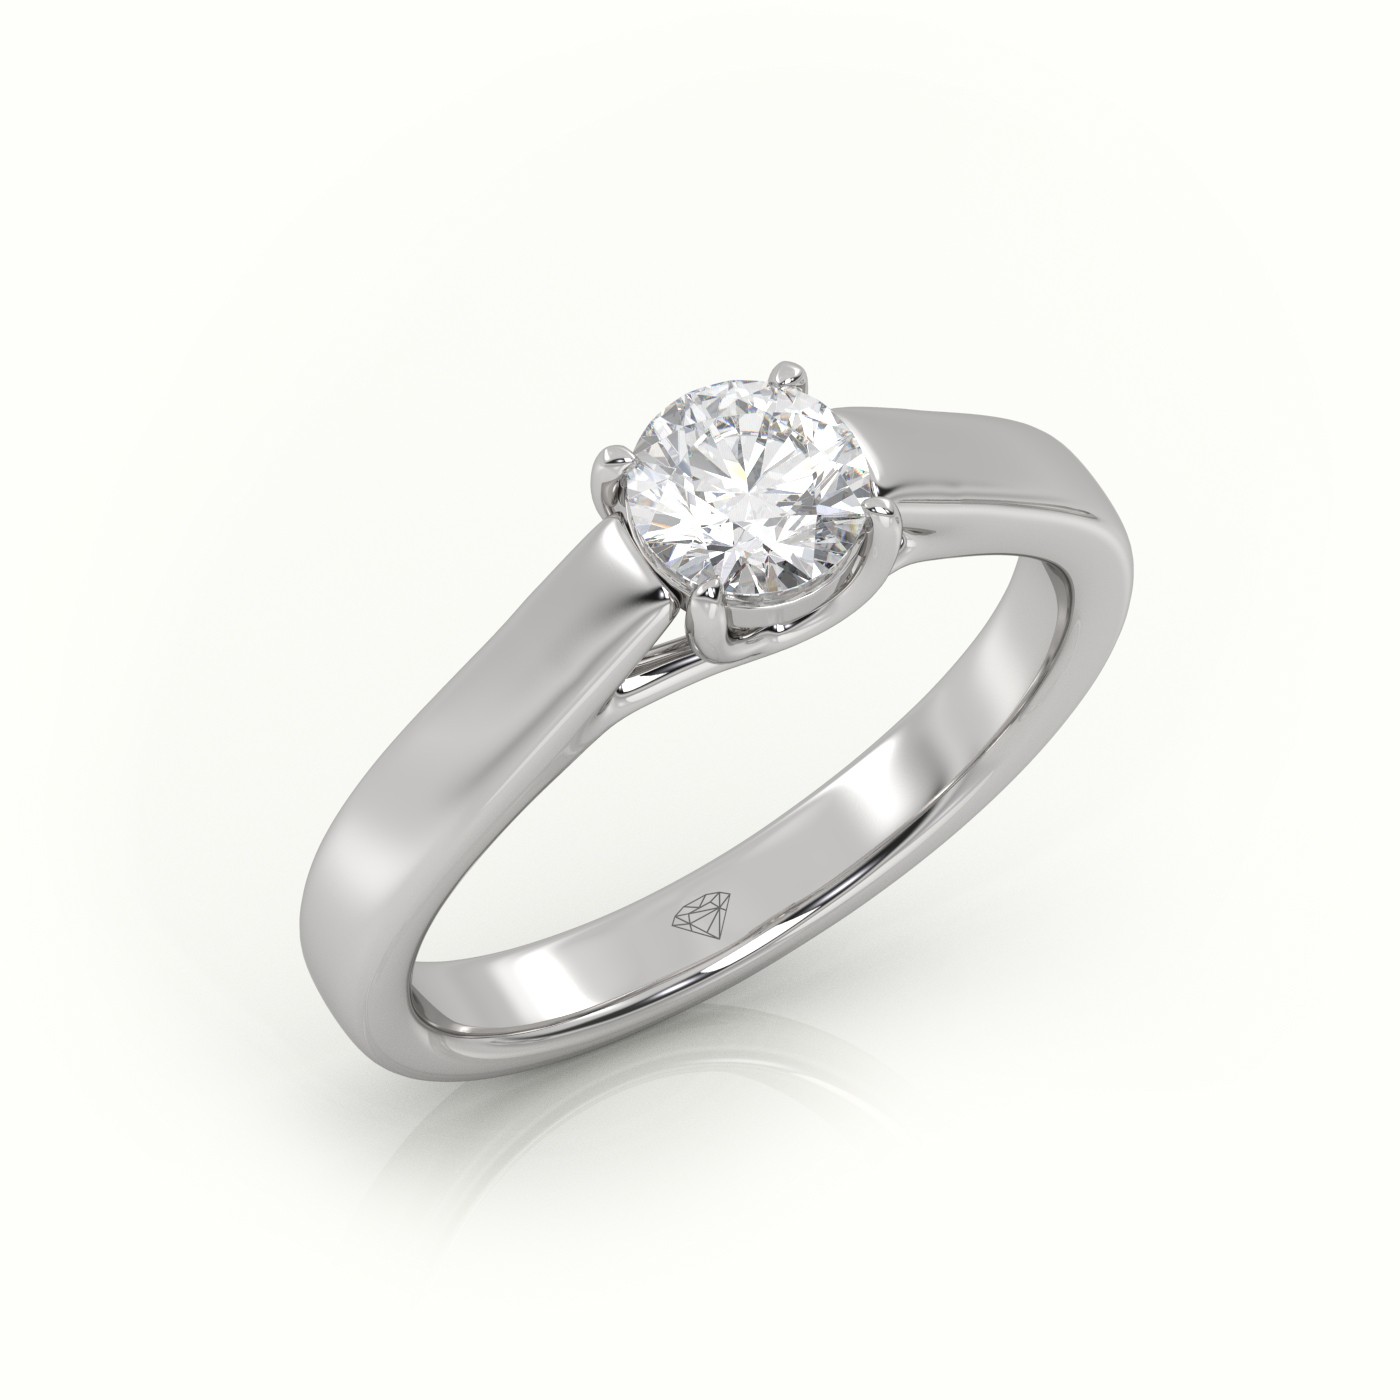 18K WHITE GOLD ROUND CUT DIAMOND 4 PRONGS SOLITAIRE ENGAGEMENT RING